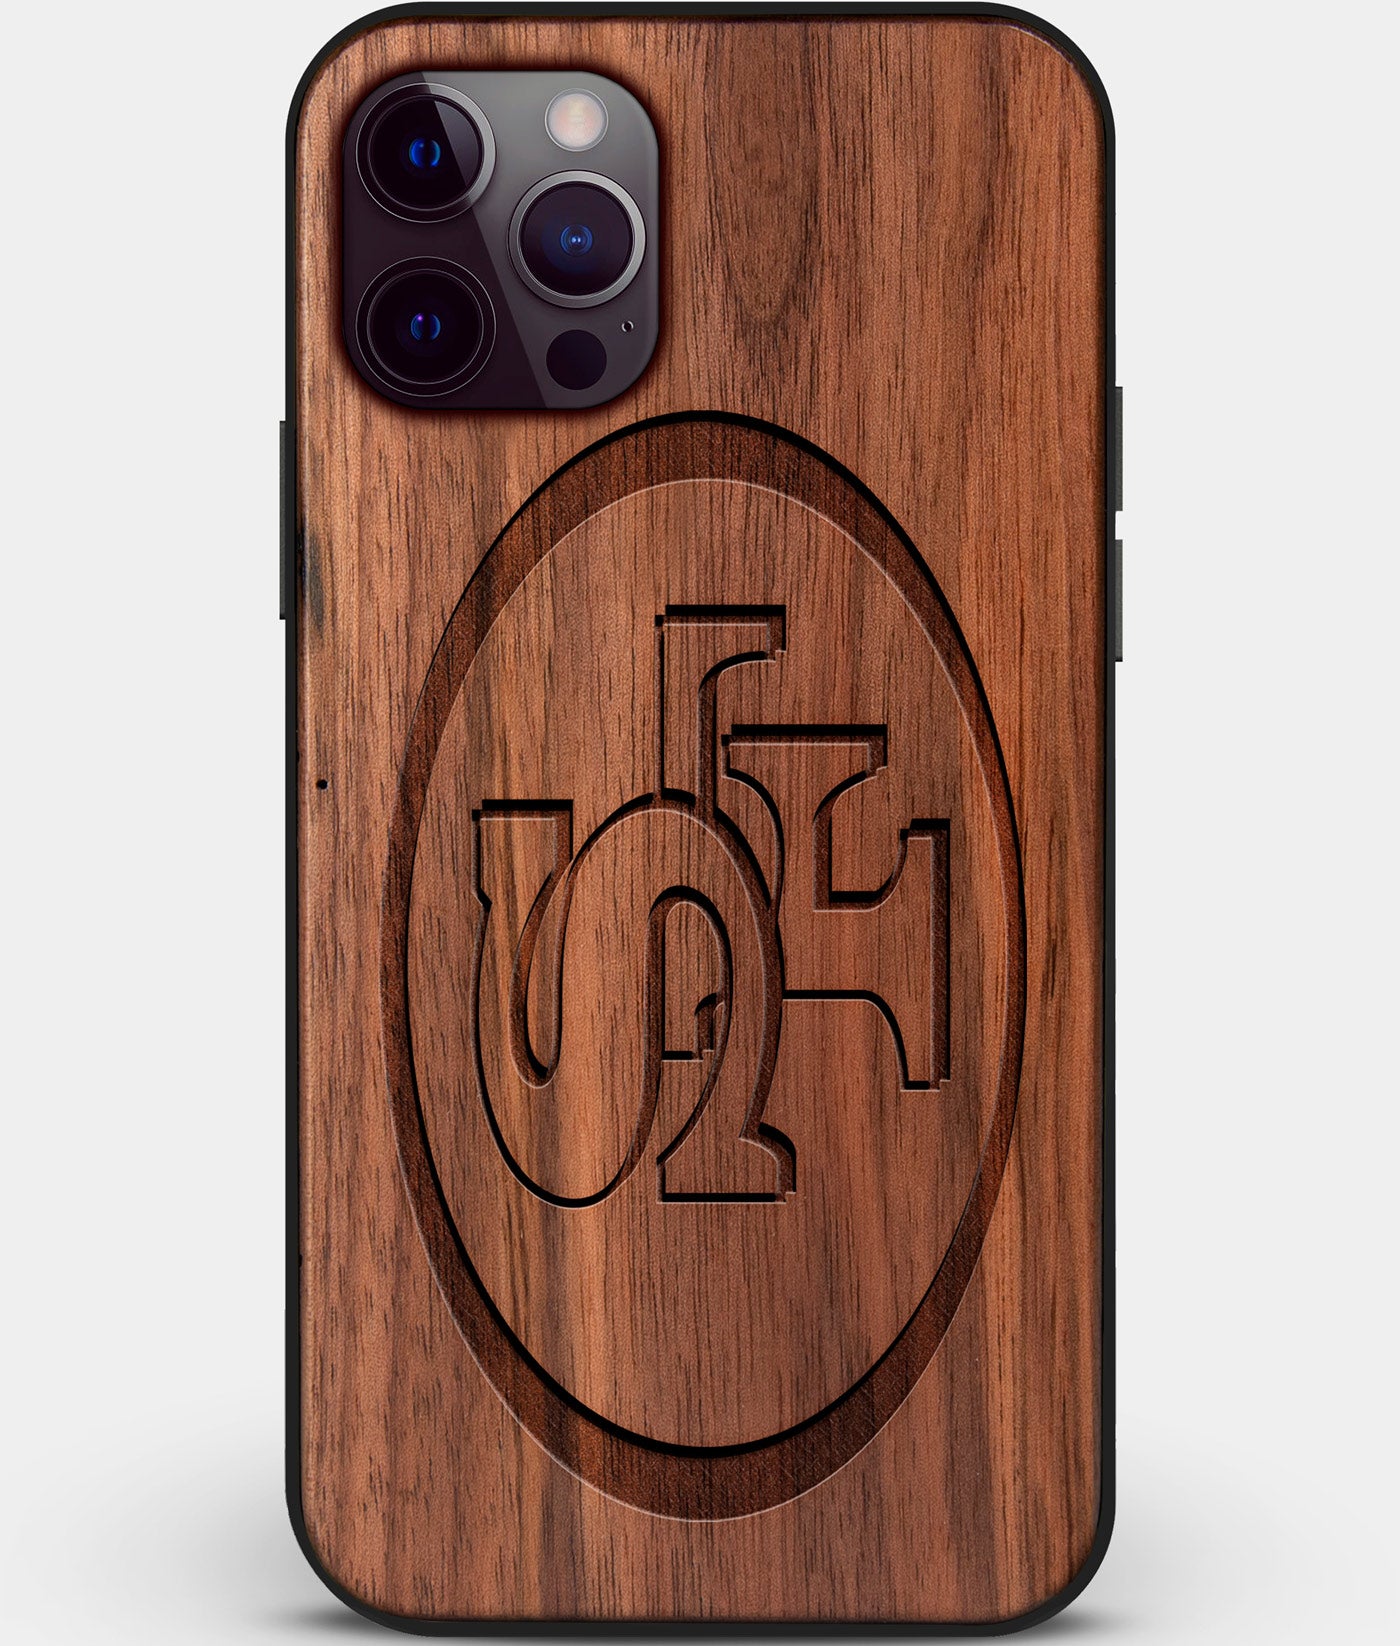 Custom Carved Wood San Francisco 49ers iPhone 12 Pro Case | Personalized Walnut Wood San Francisco 49ers Cover, Birthday Gift, Gifts For Him, Monogrammed Gift For Fan | by Engraved In Nature